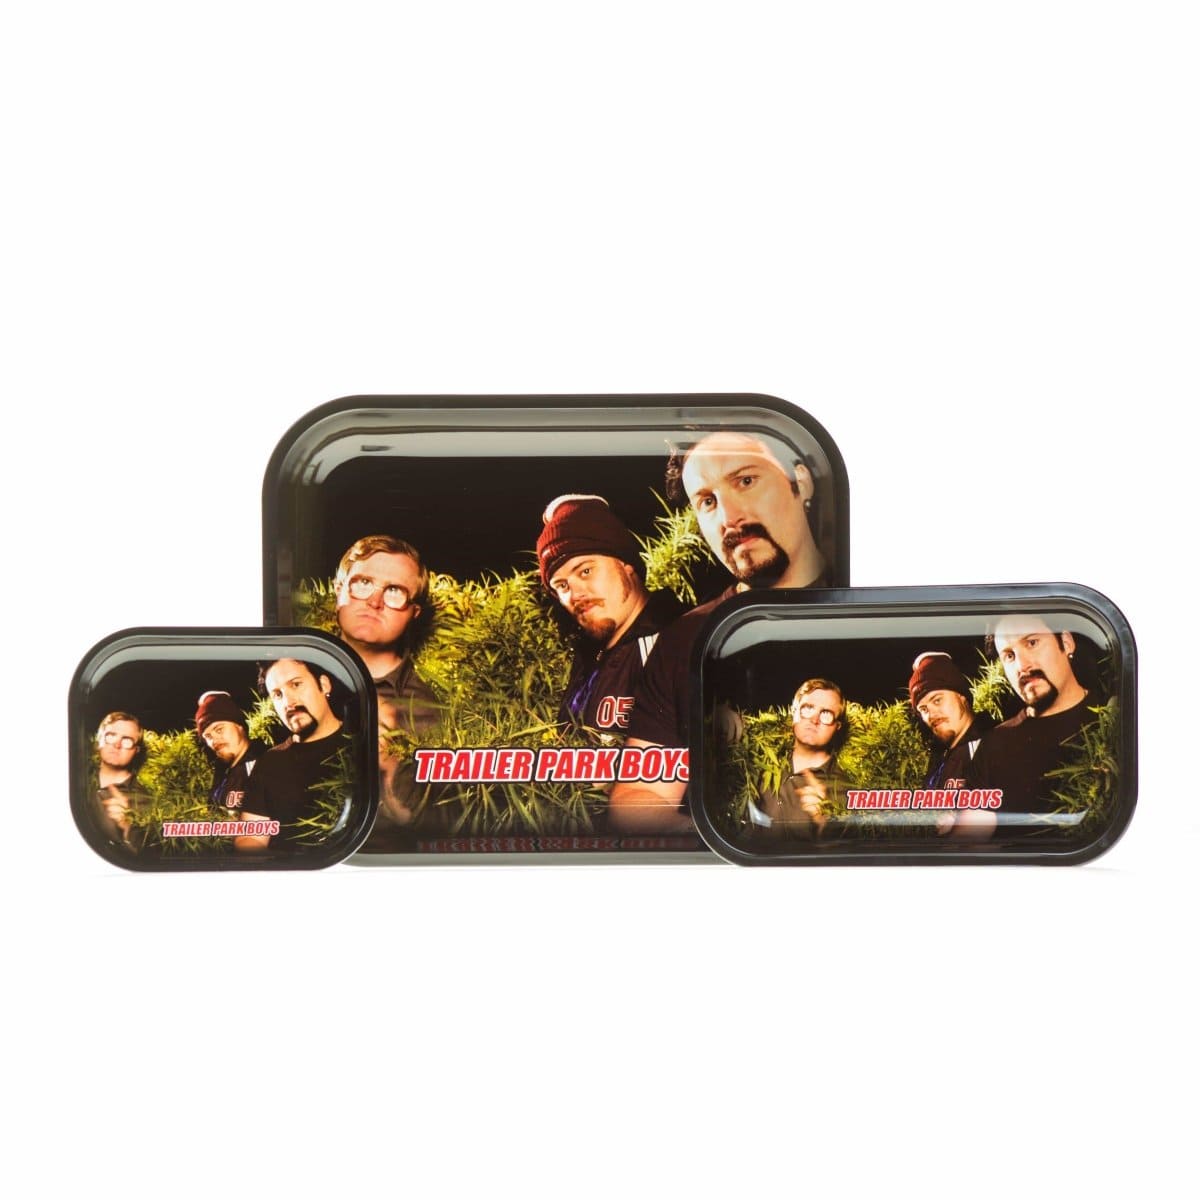 Trailer Park Boys Rolling Tray Clippings Rolling Tray